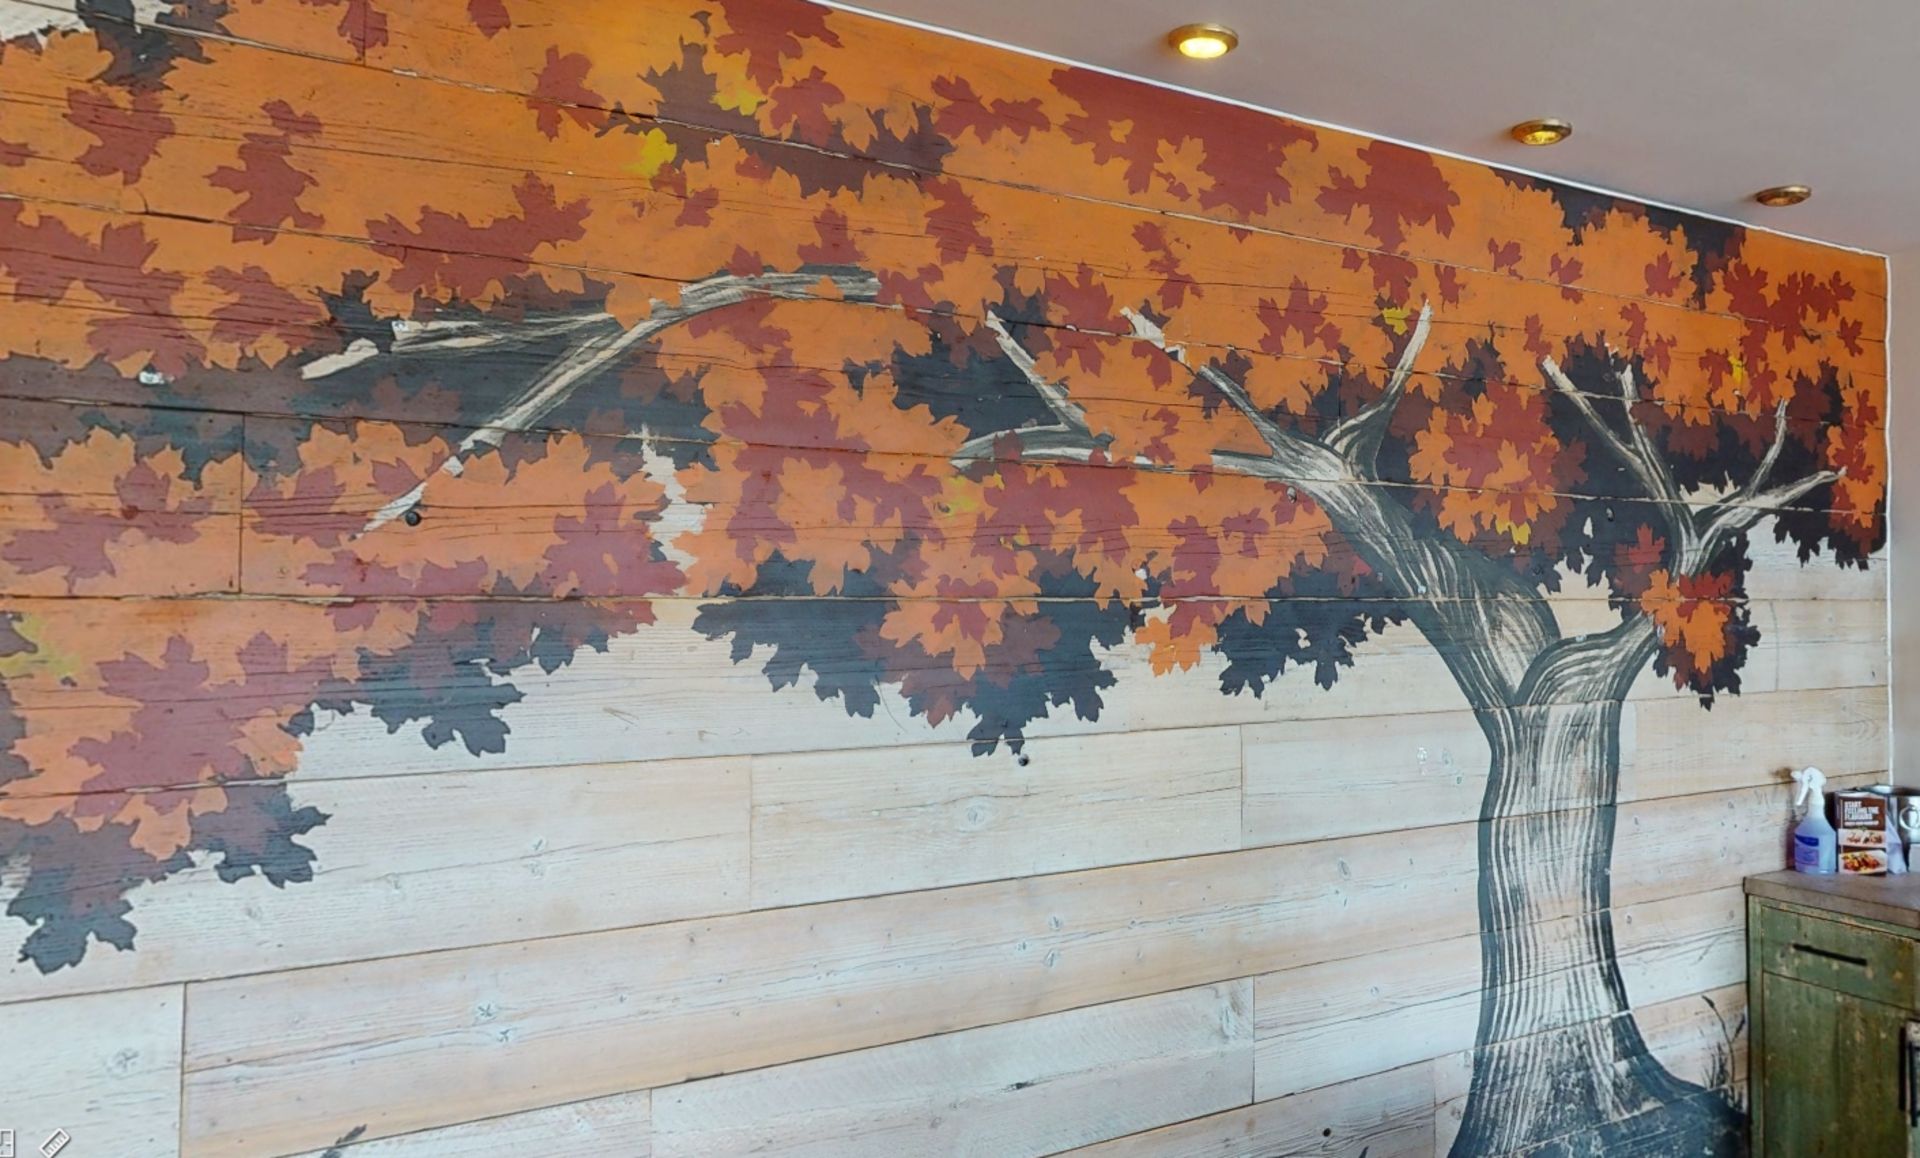 1 x Natural Wood Wall Covering Panels Featuring a Hand Painted Leafy Autumn Tree - Image 3 of 7